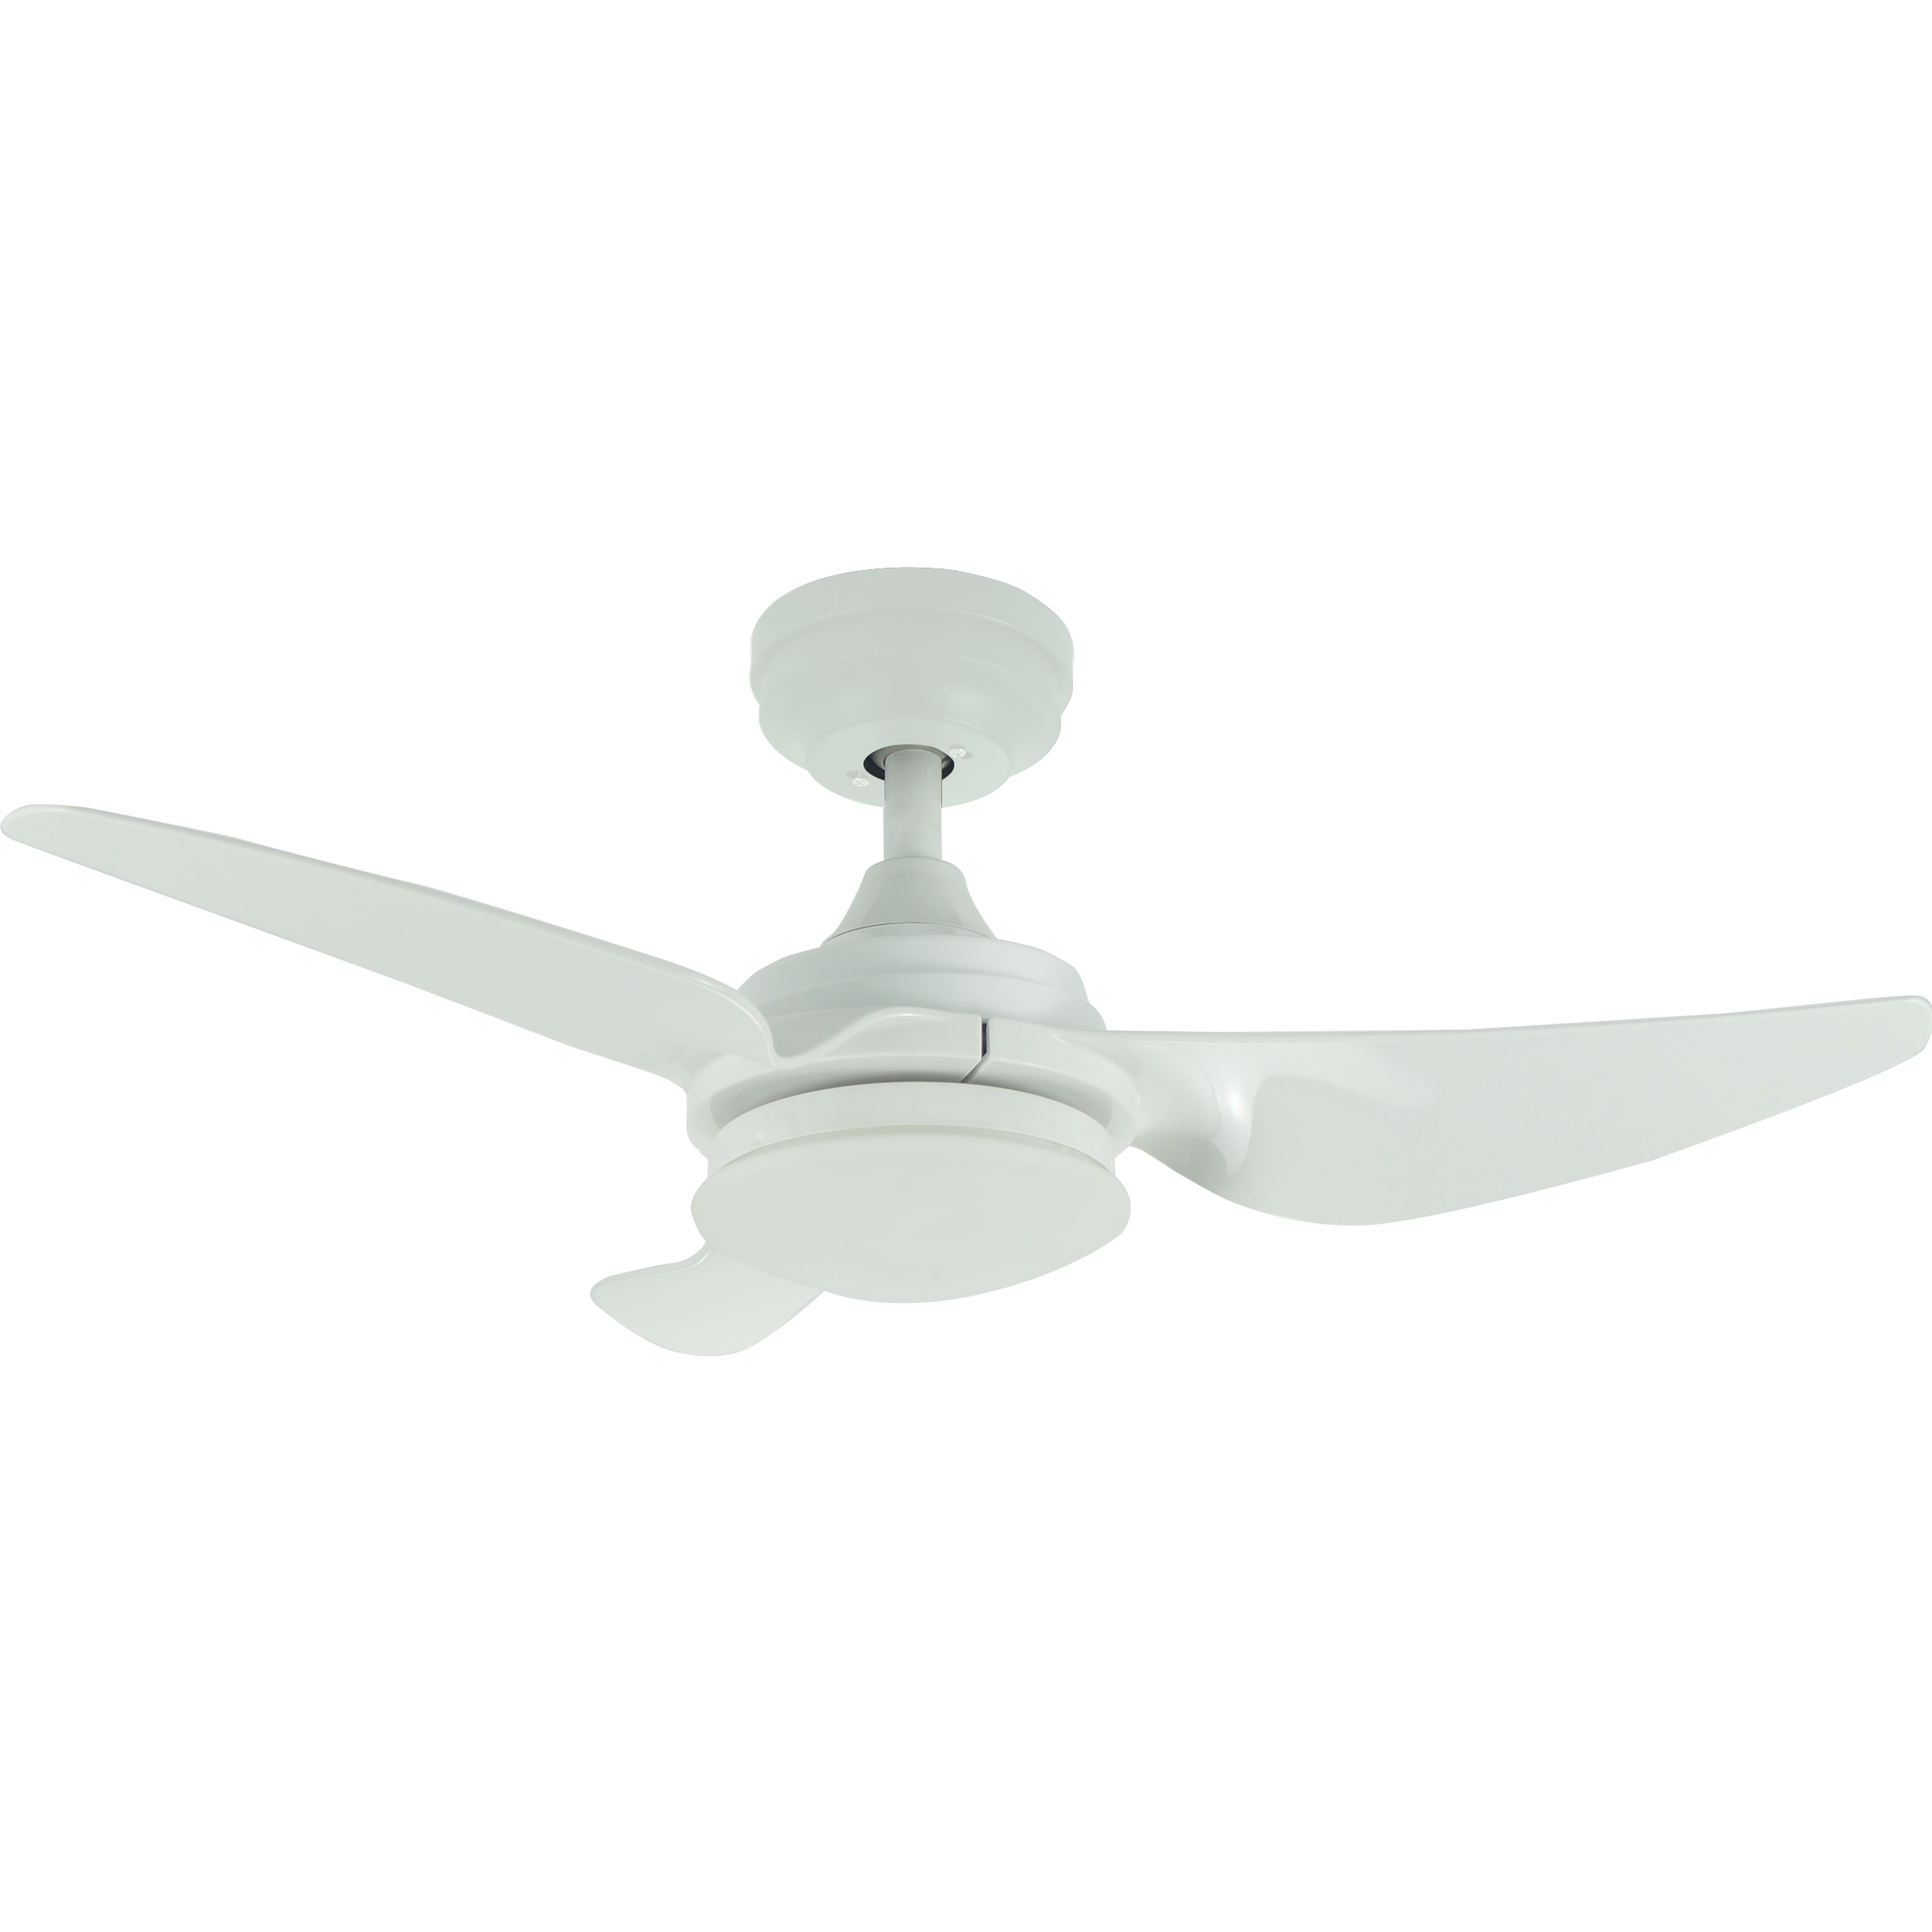 Modern Small Size Series Ceiling Fan Home Appliances Electric Domestic Ceiling Fan with LED Light